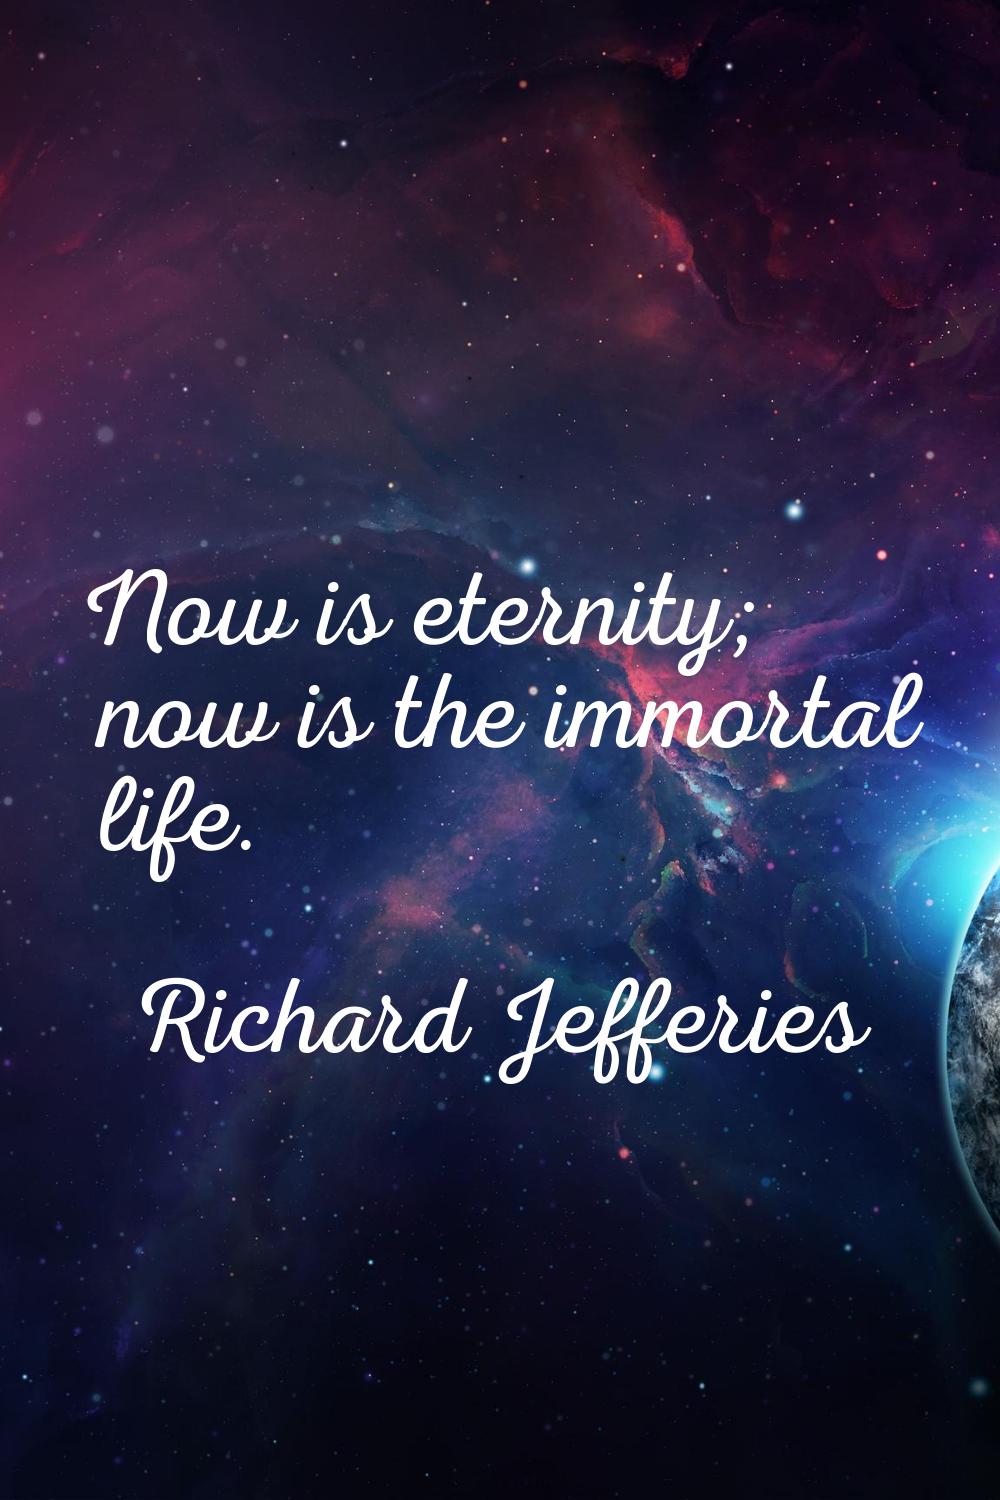 Now is eternity; now is the immortal life.